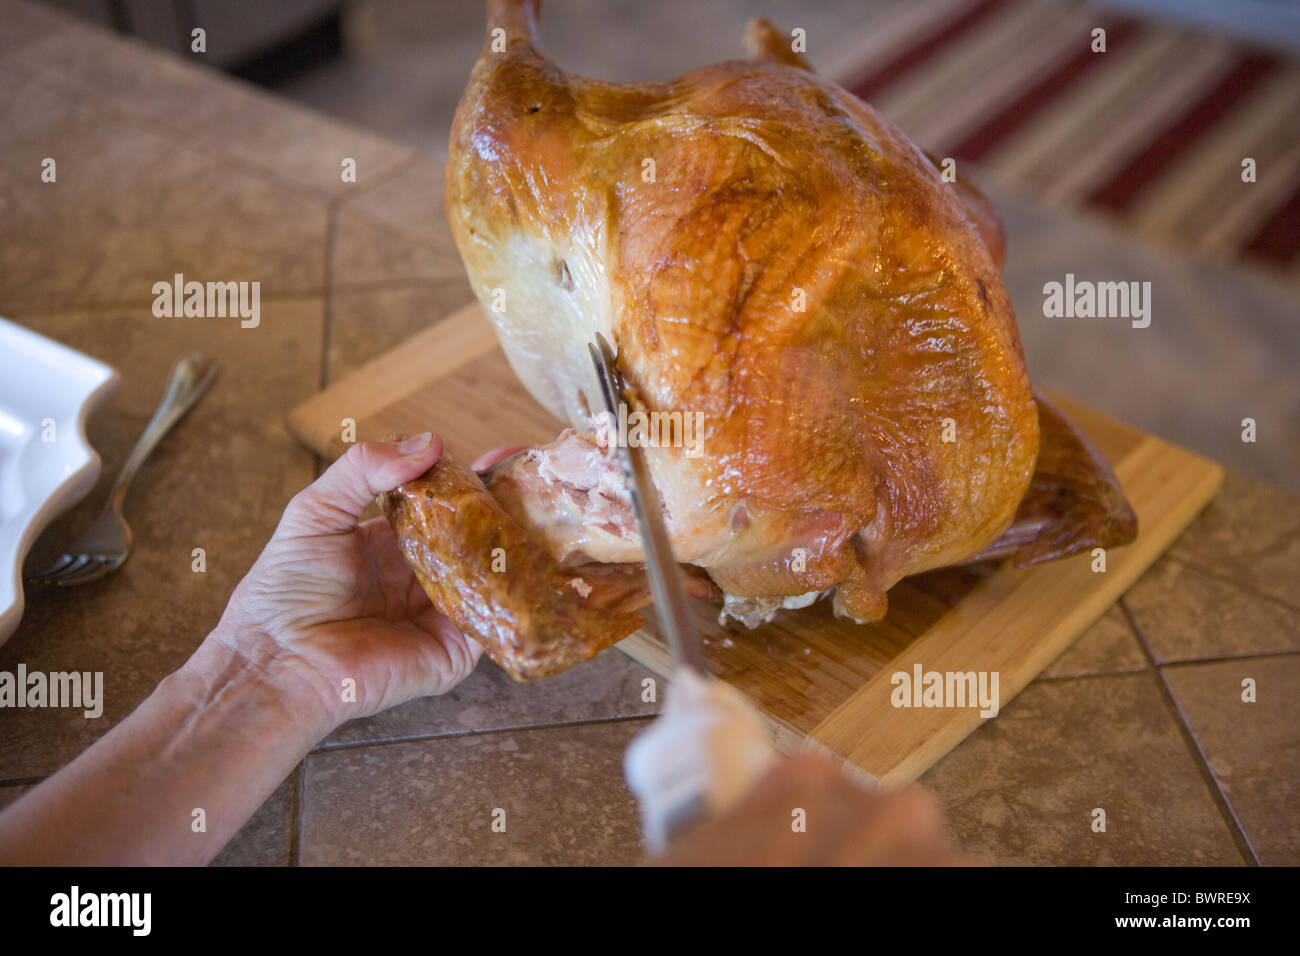 https://c8.alamy.com/comp/BWRE9X/close-up-of-a-womans-hand-cutting-a-turkey-leg-with-an-electric-carving-BWRE9X.jpg